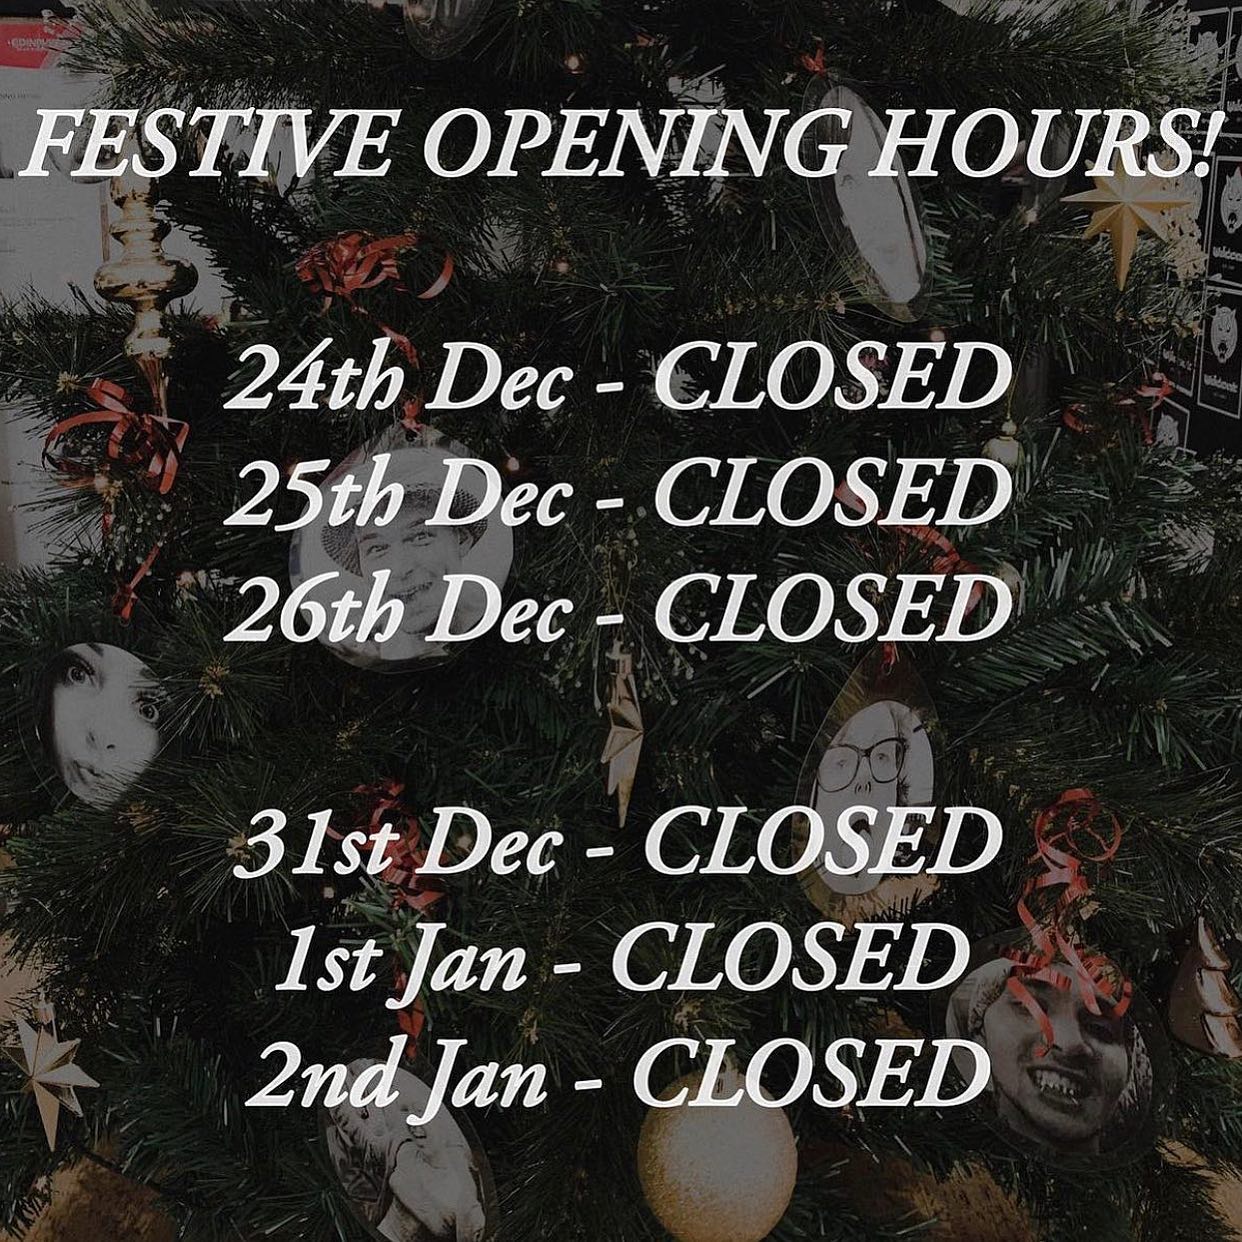 We’ll be closed for a few days over Christmas and New Year because tattoo artists & piercers are real people too 🎅

However we’re open on those awkward days inbetween if you’re looking for something to do that isn’t eating toblerone and drinking mulled wine 🎄✨

If you want to get tattooed, fill out the tattoo enquiry form on our website 💫

 